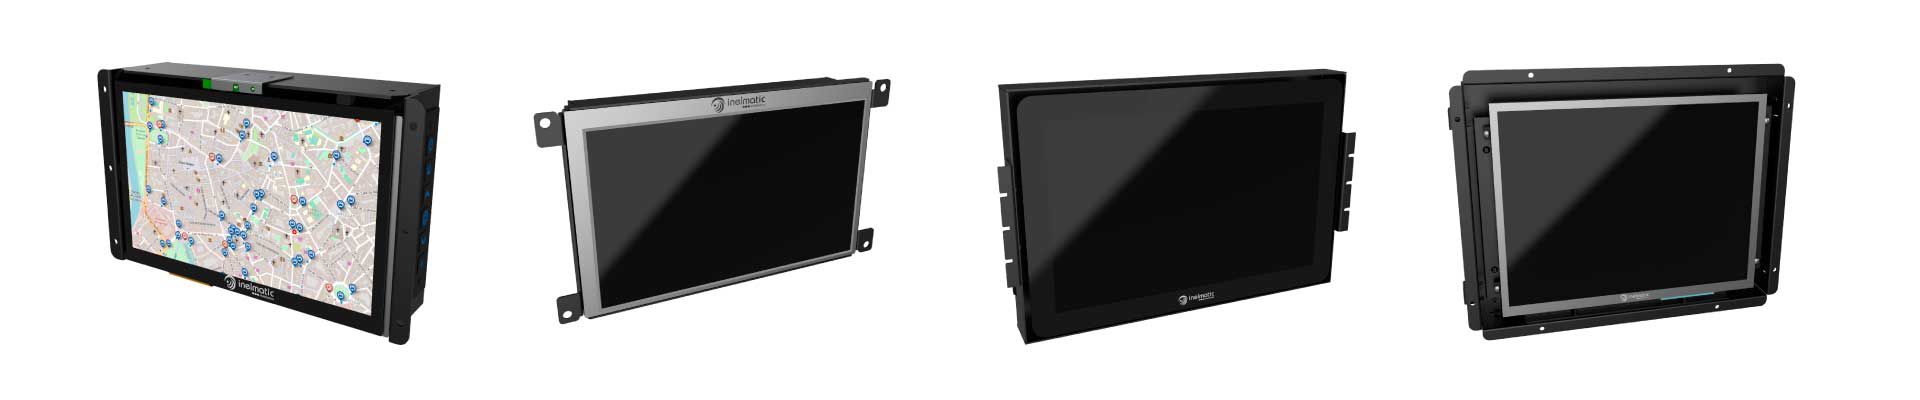 Open frame monitors for easy integration - Inelmatic